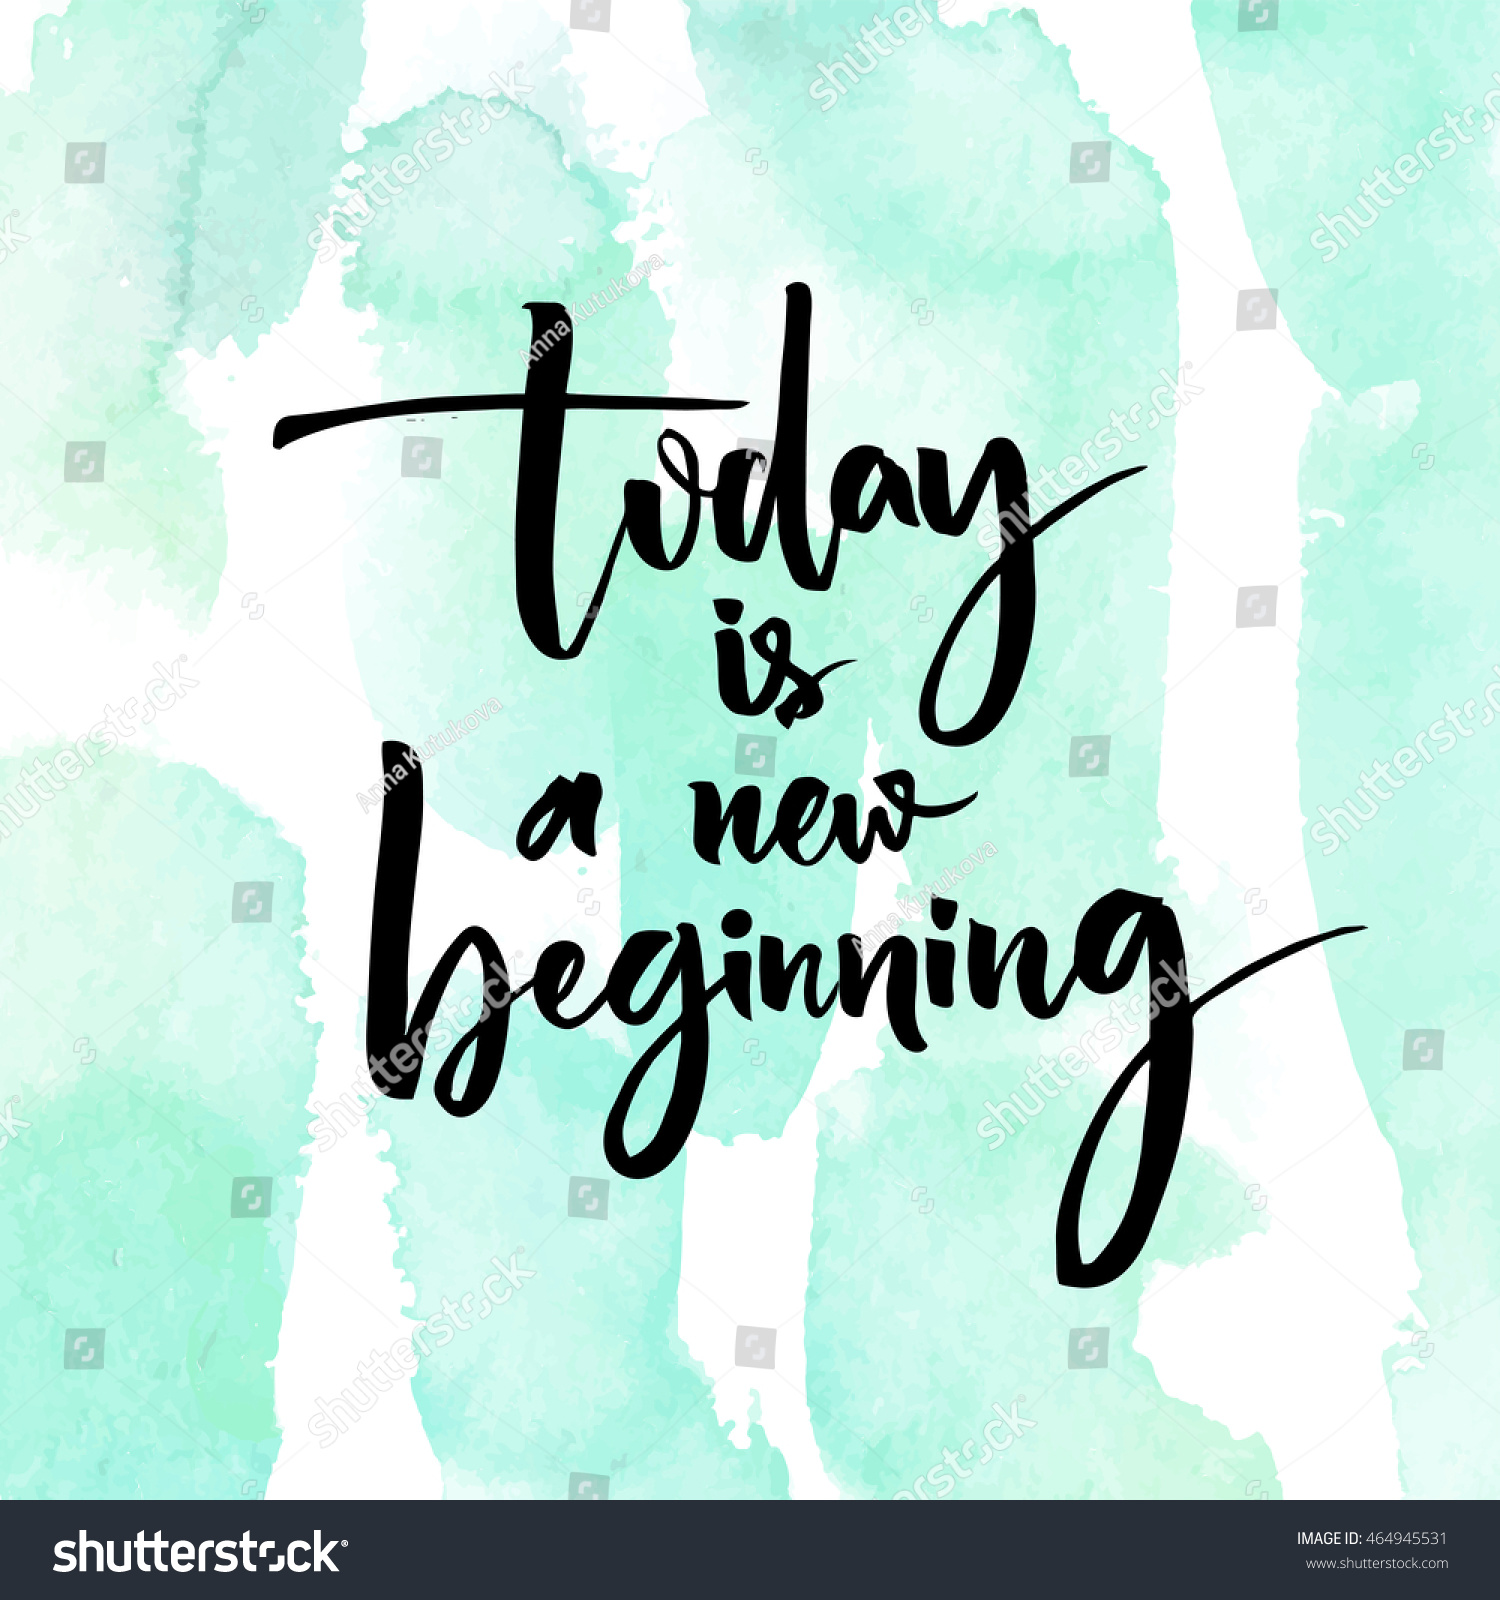 Today New Beginning Inspirational Quote Turquoise Stock 